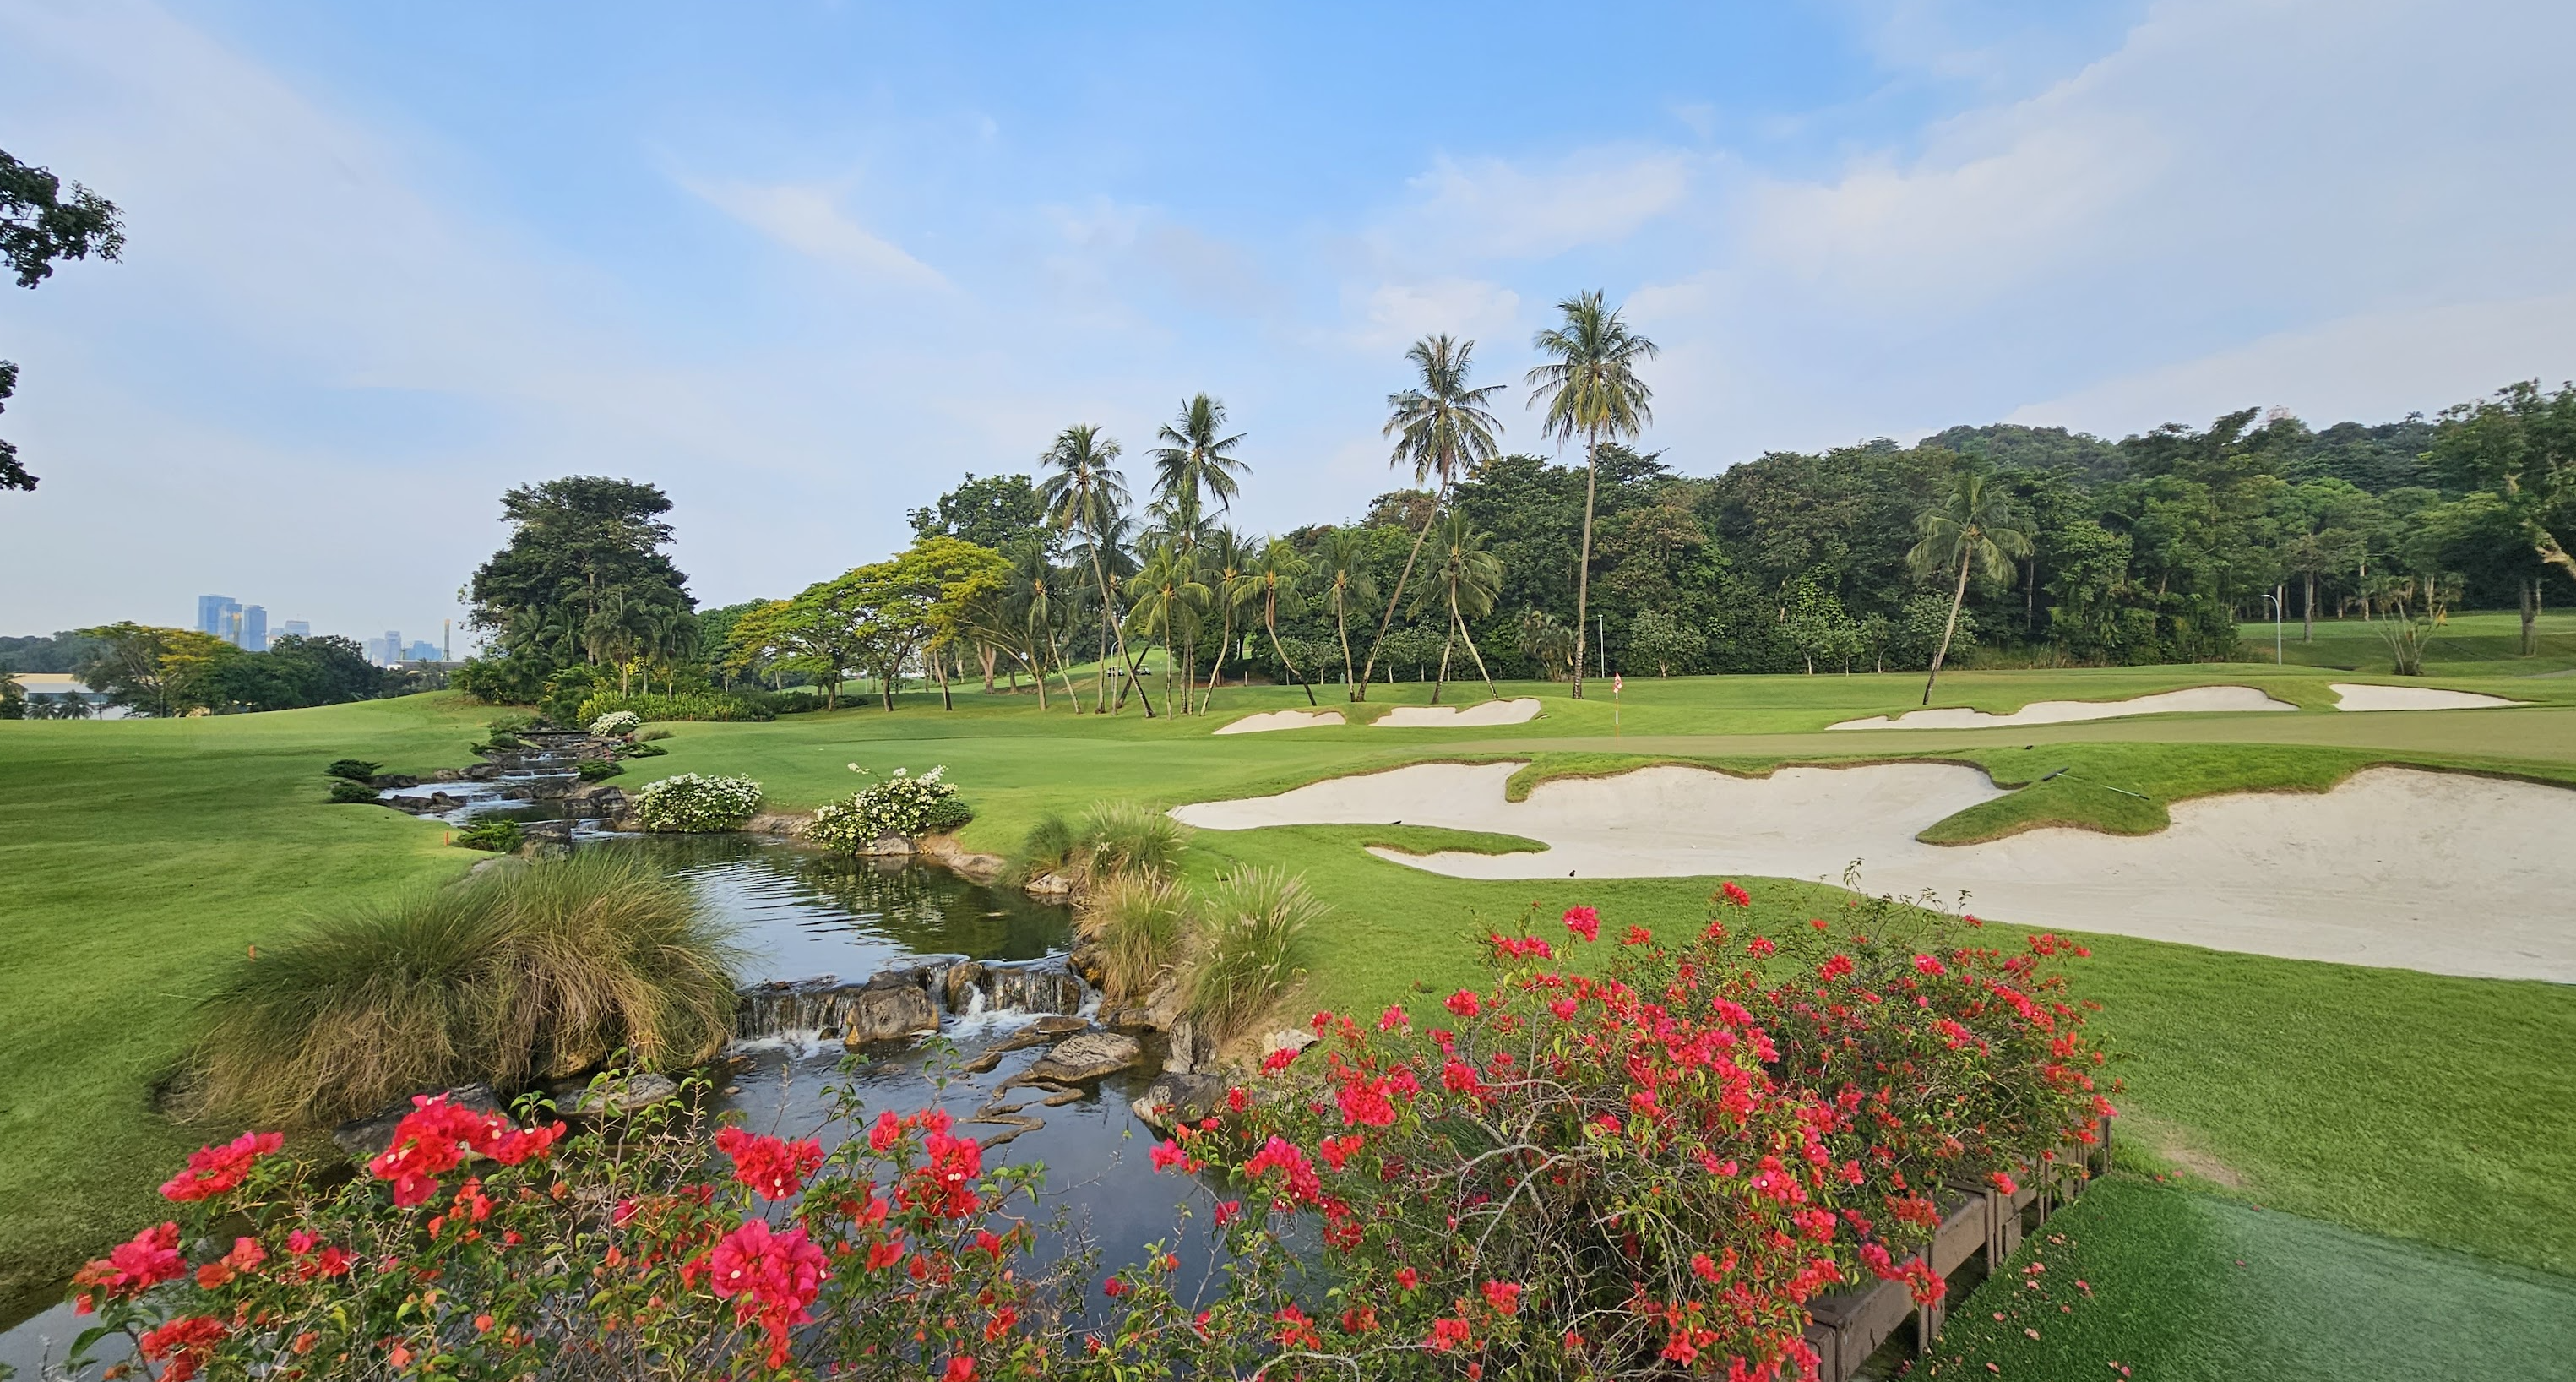 Looking back down the 16th hole on the Serapong Course at Sentosa Golf Club